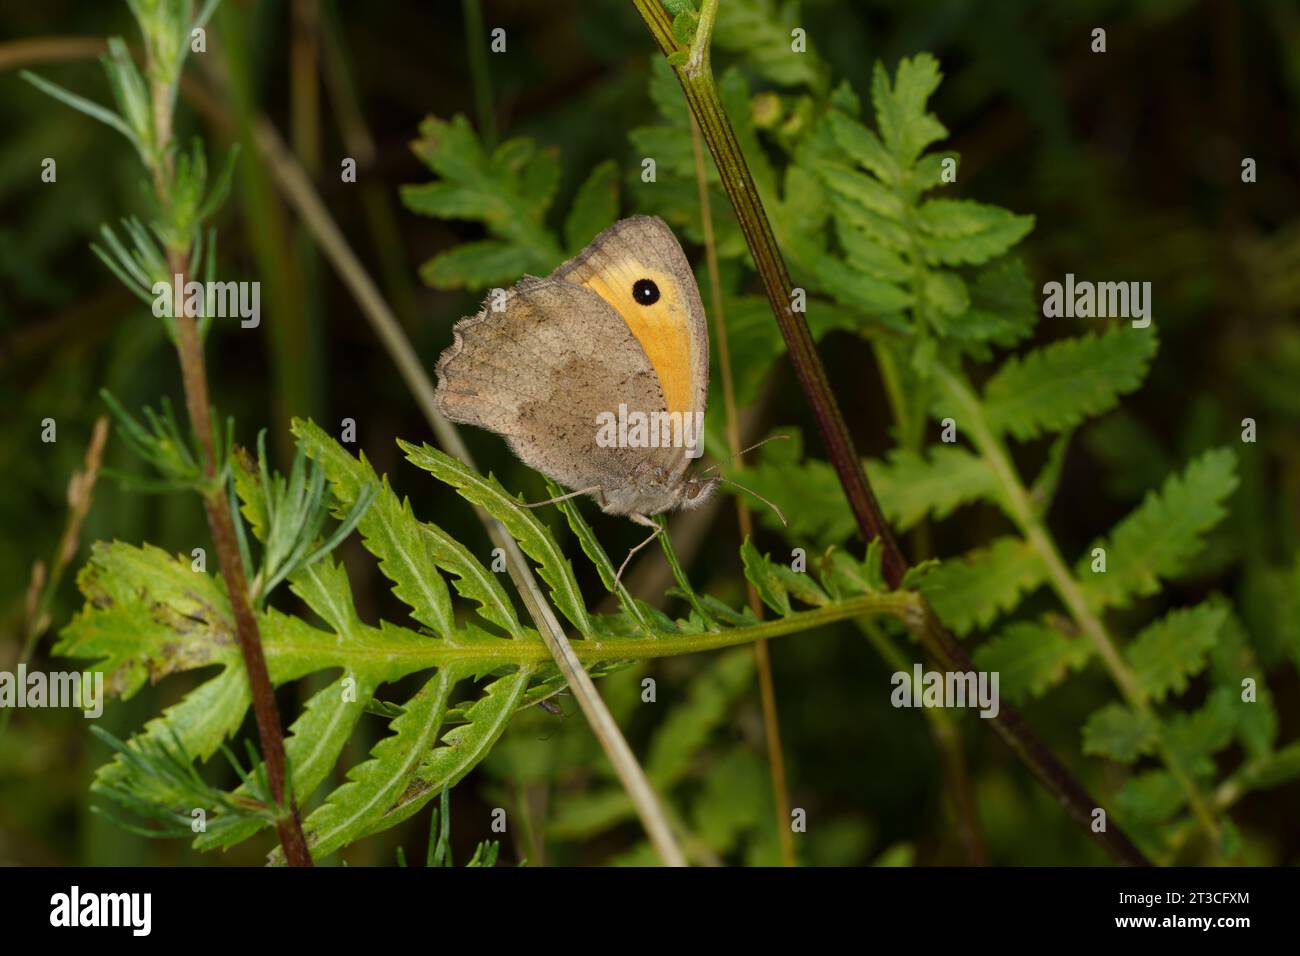 Hyponephele lycaon Family Nymphalidae Genus Hyponephele Dusky meadow brown butterfly wild nature insect photography, picture, wallpaper Stock Photo